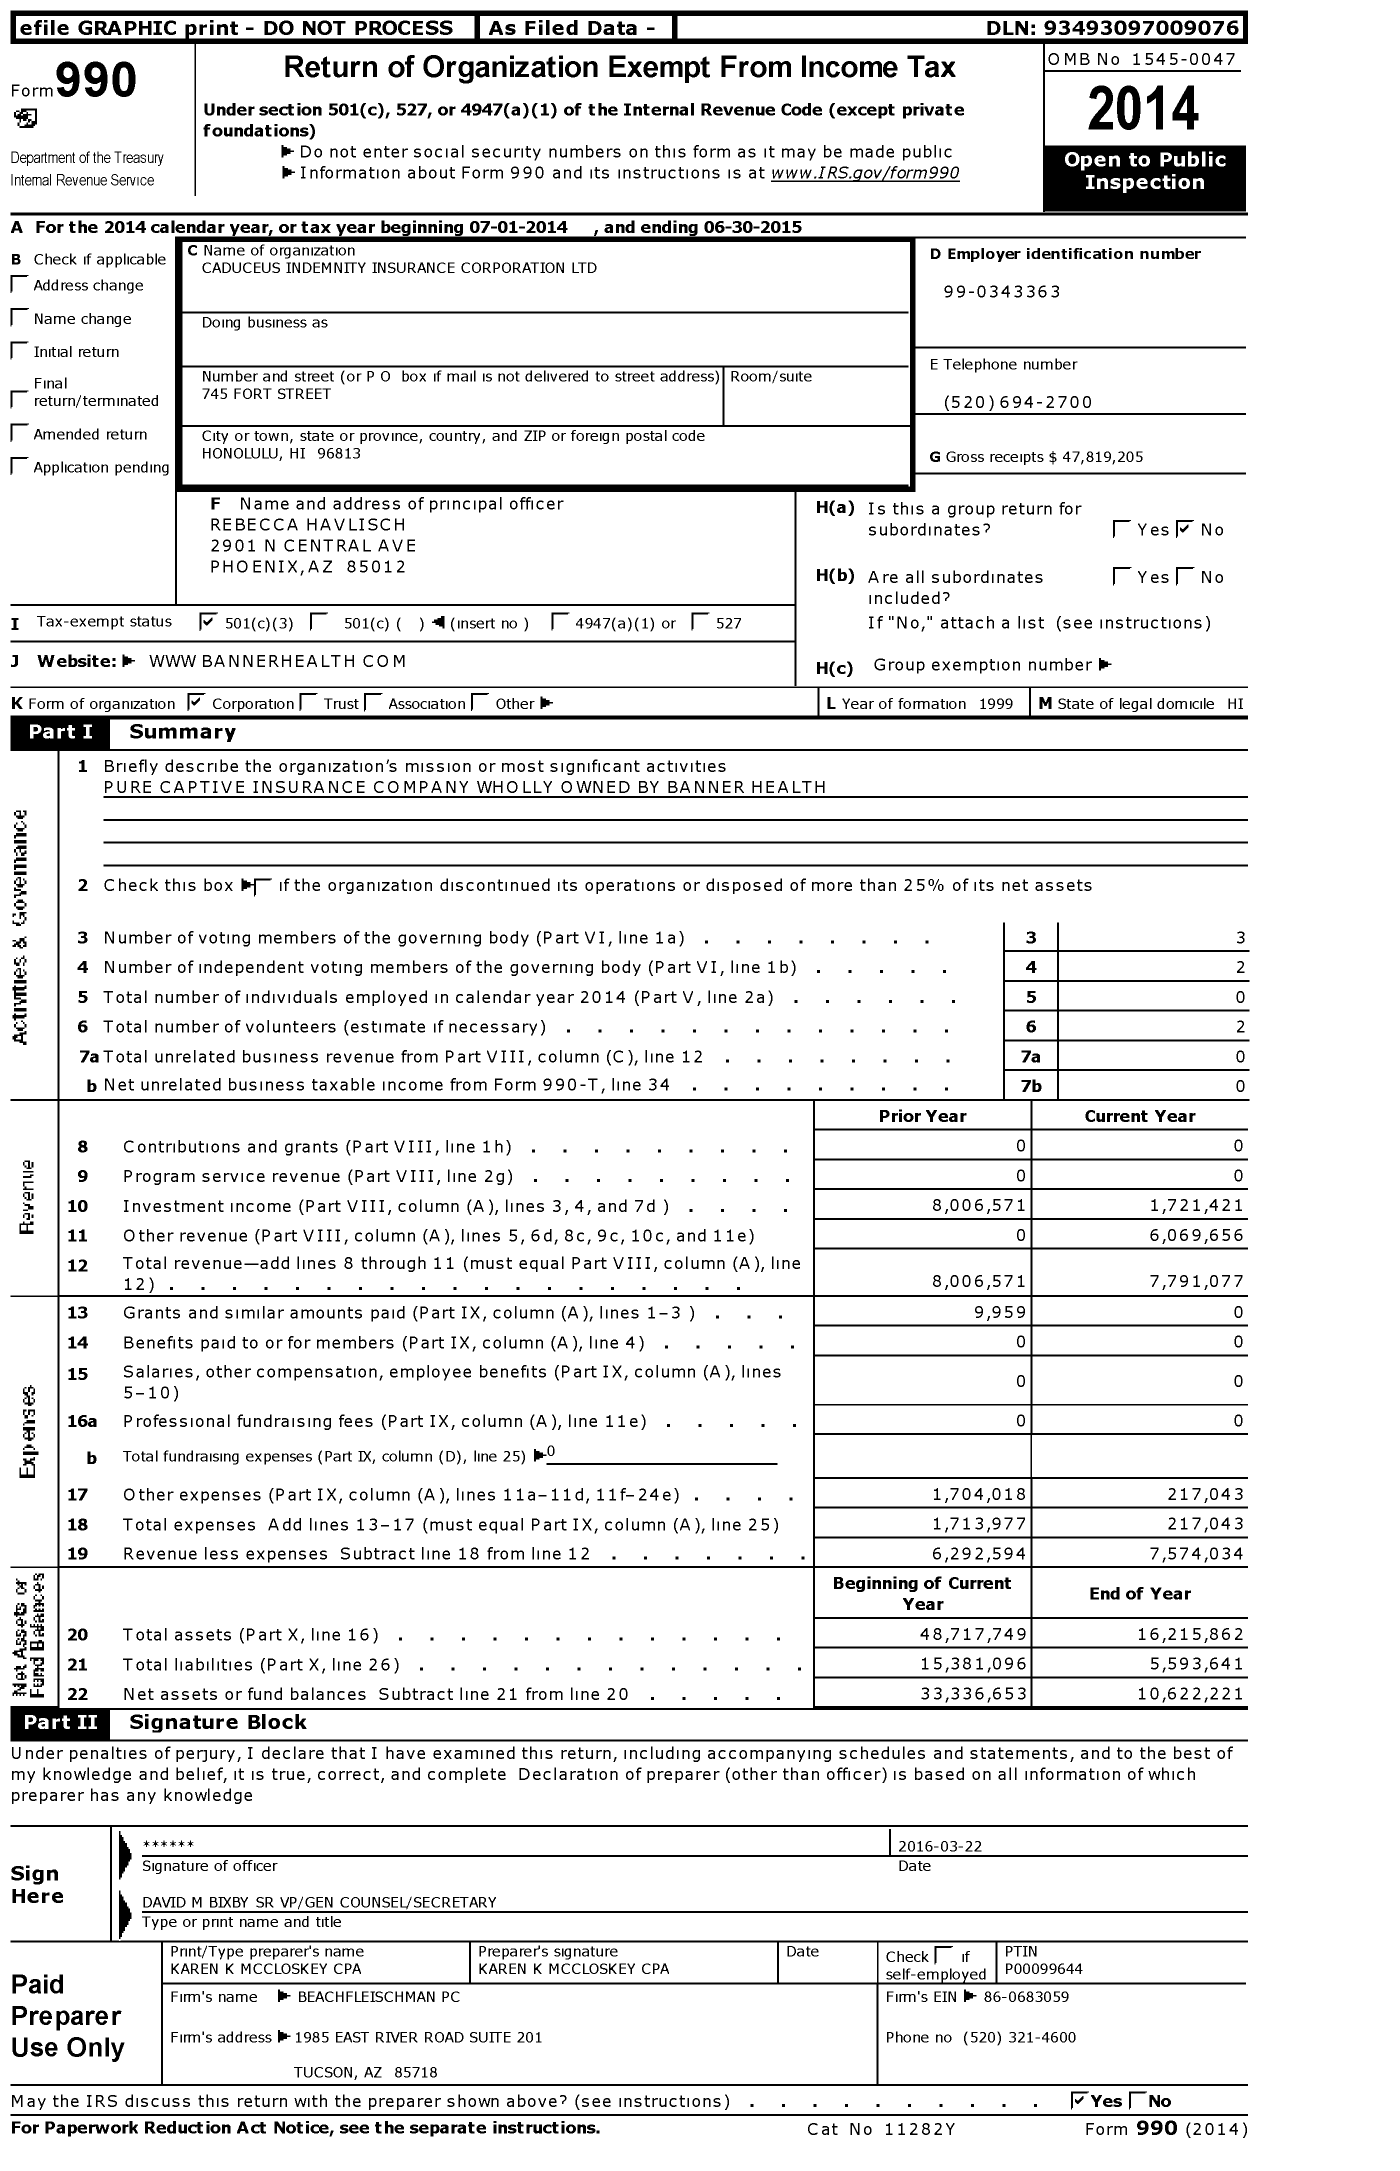 Image of first page of 2014 Form 990 for Caduceus Indemnity Insurance Corporation